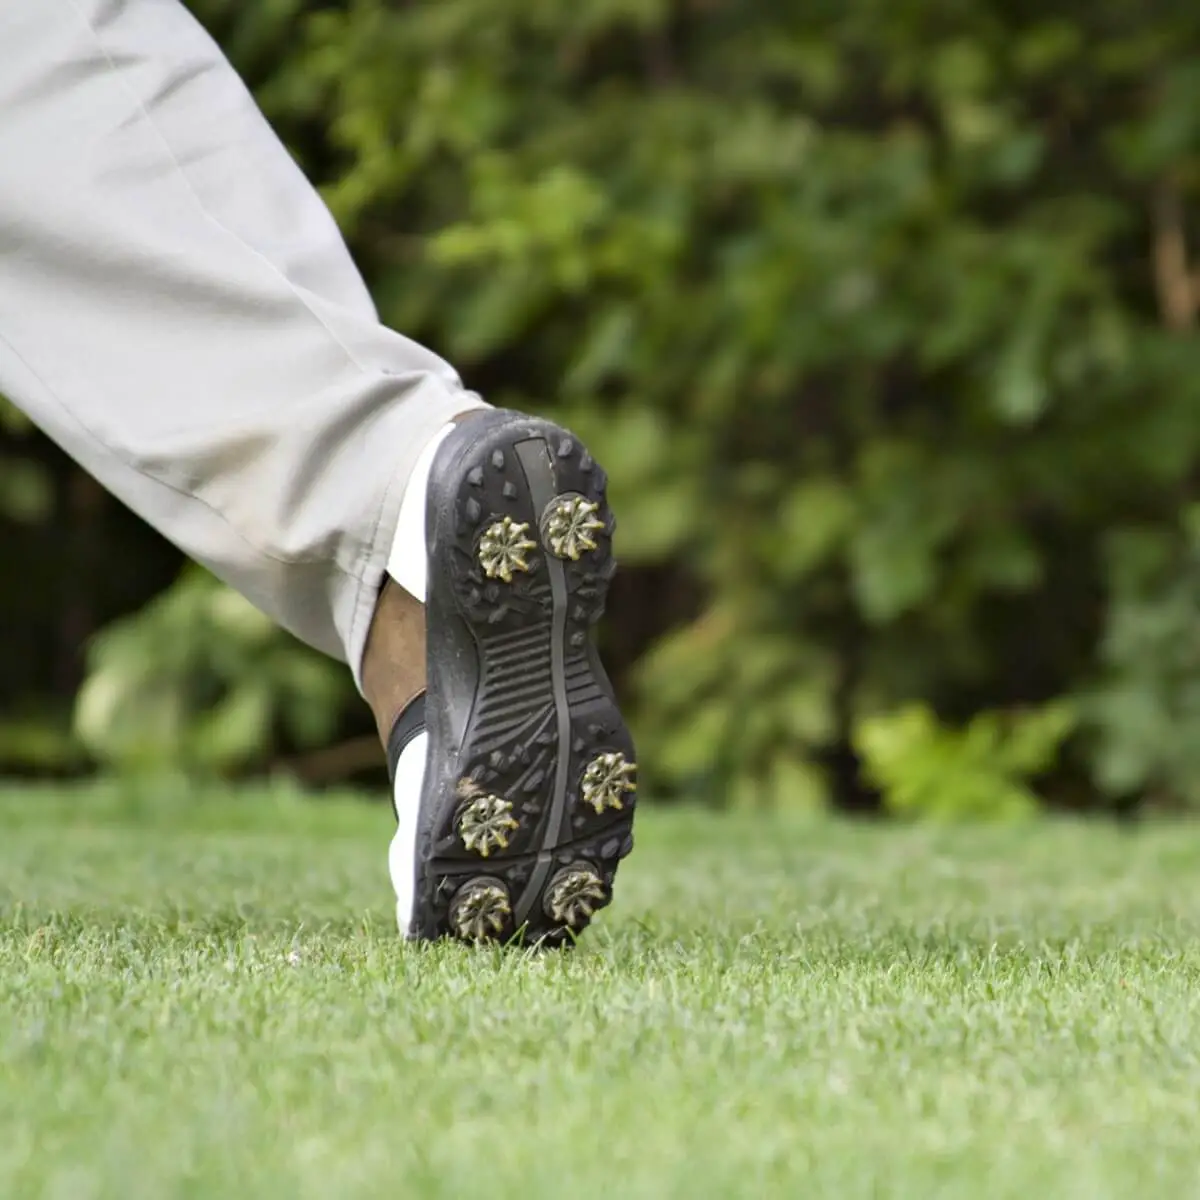 Man in golf spikes walking of the 18th green.